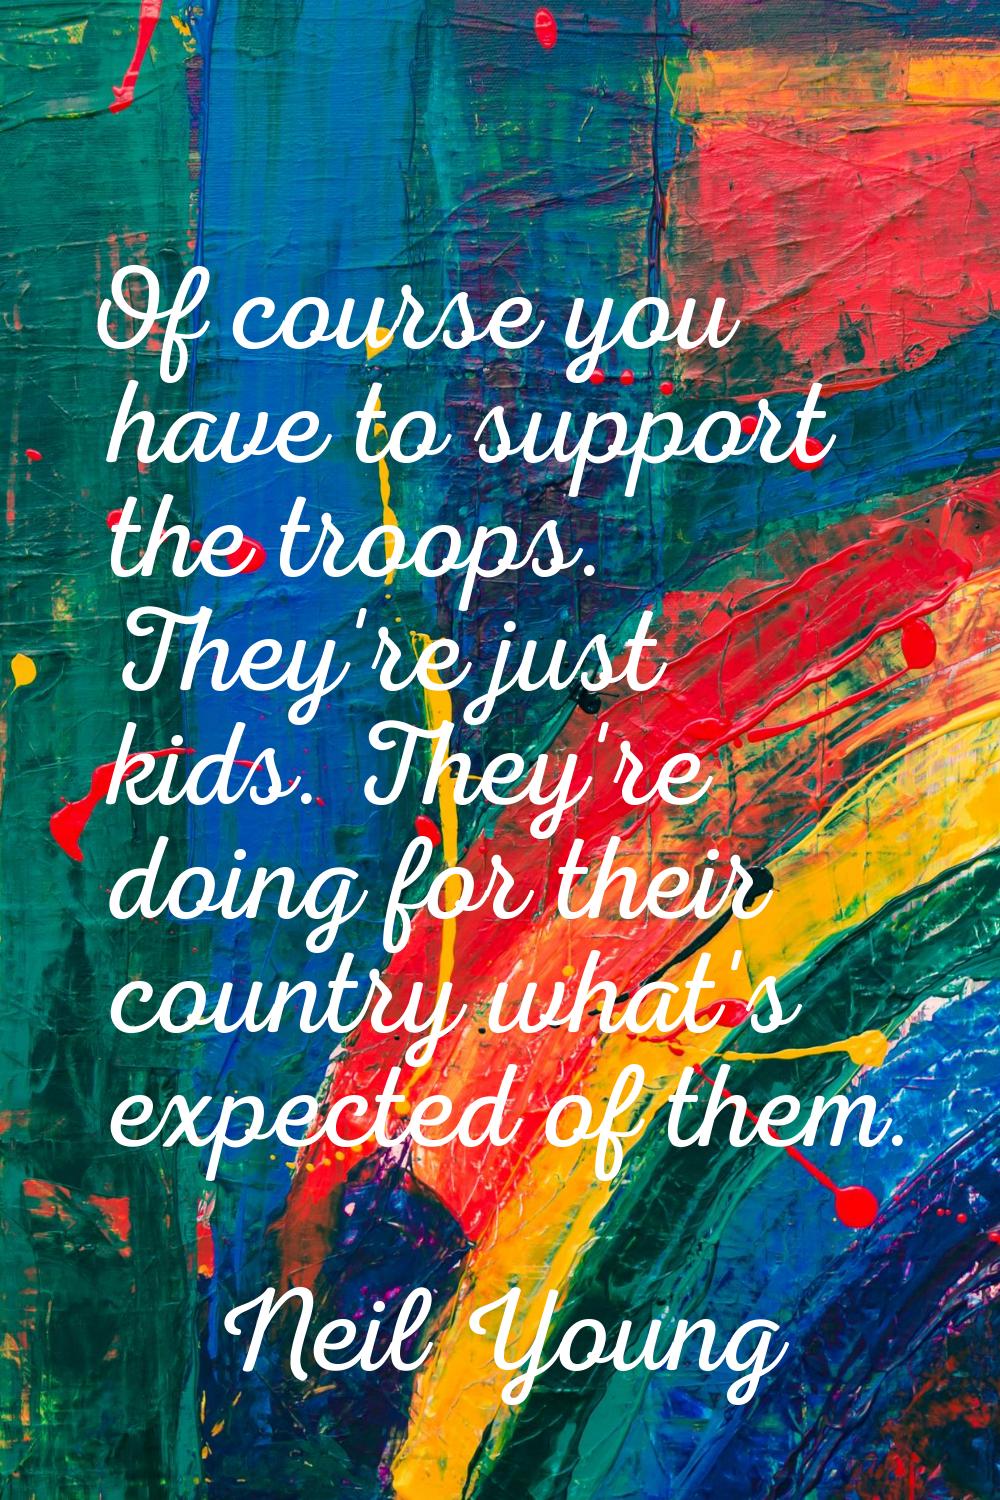 Of course you have to support the troops. They're just kids. They're doing for their country what's